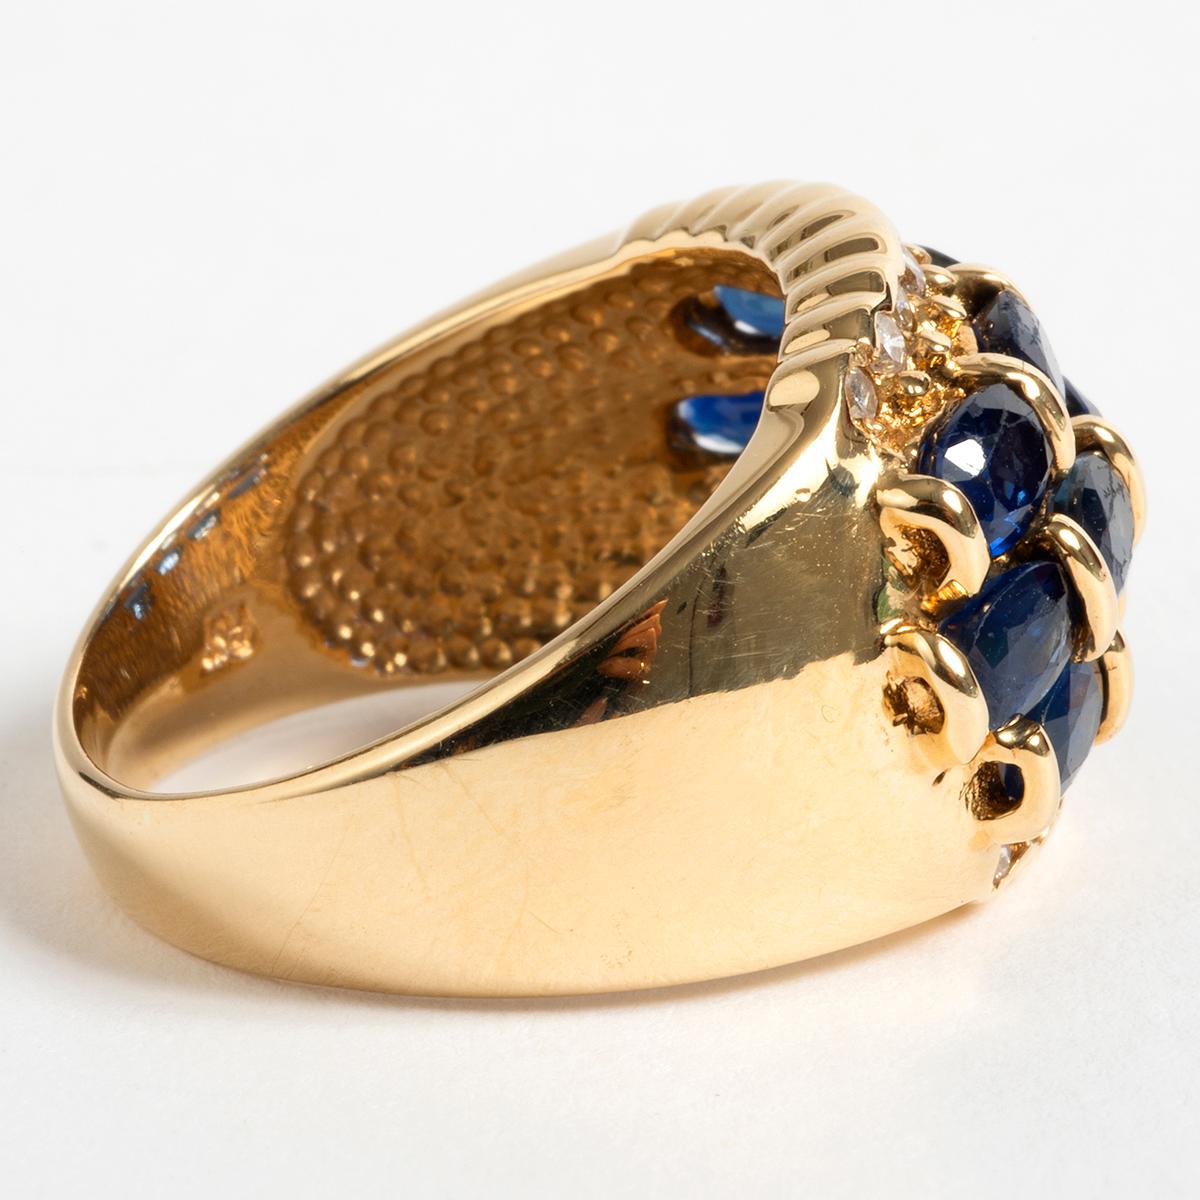 A unique piece within our carefully curated Vintage & Prestige fine jewellery collection, we are delighted to present the following:

This glamours piece, comes set in 14 carat yellow gold surrounded by sapphires and diamonds.  This ring comes in UK